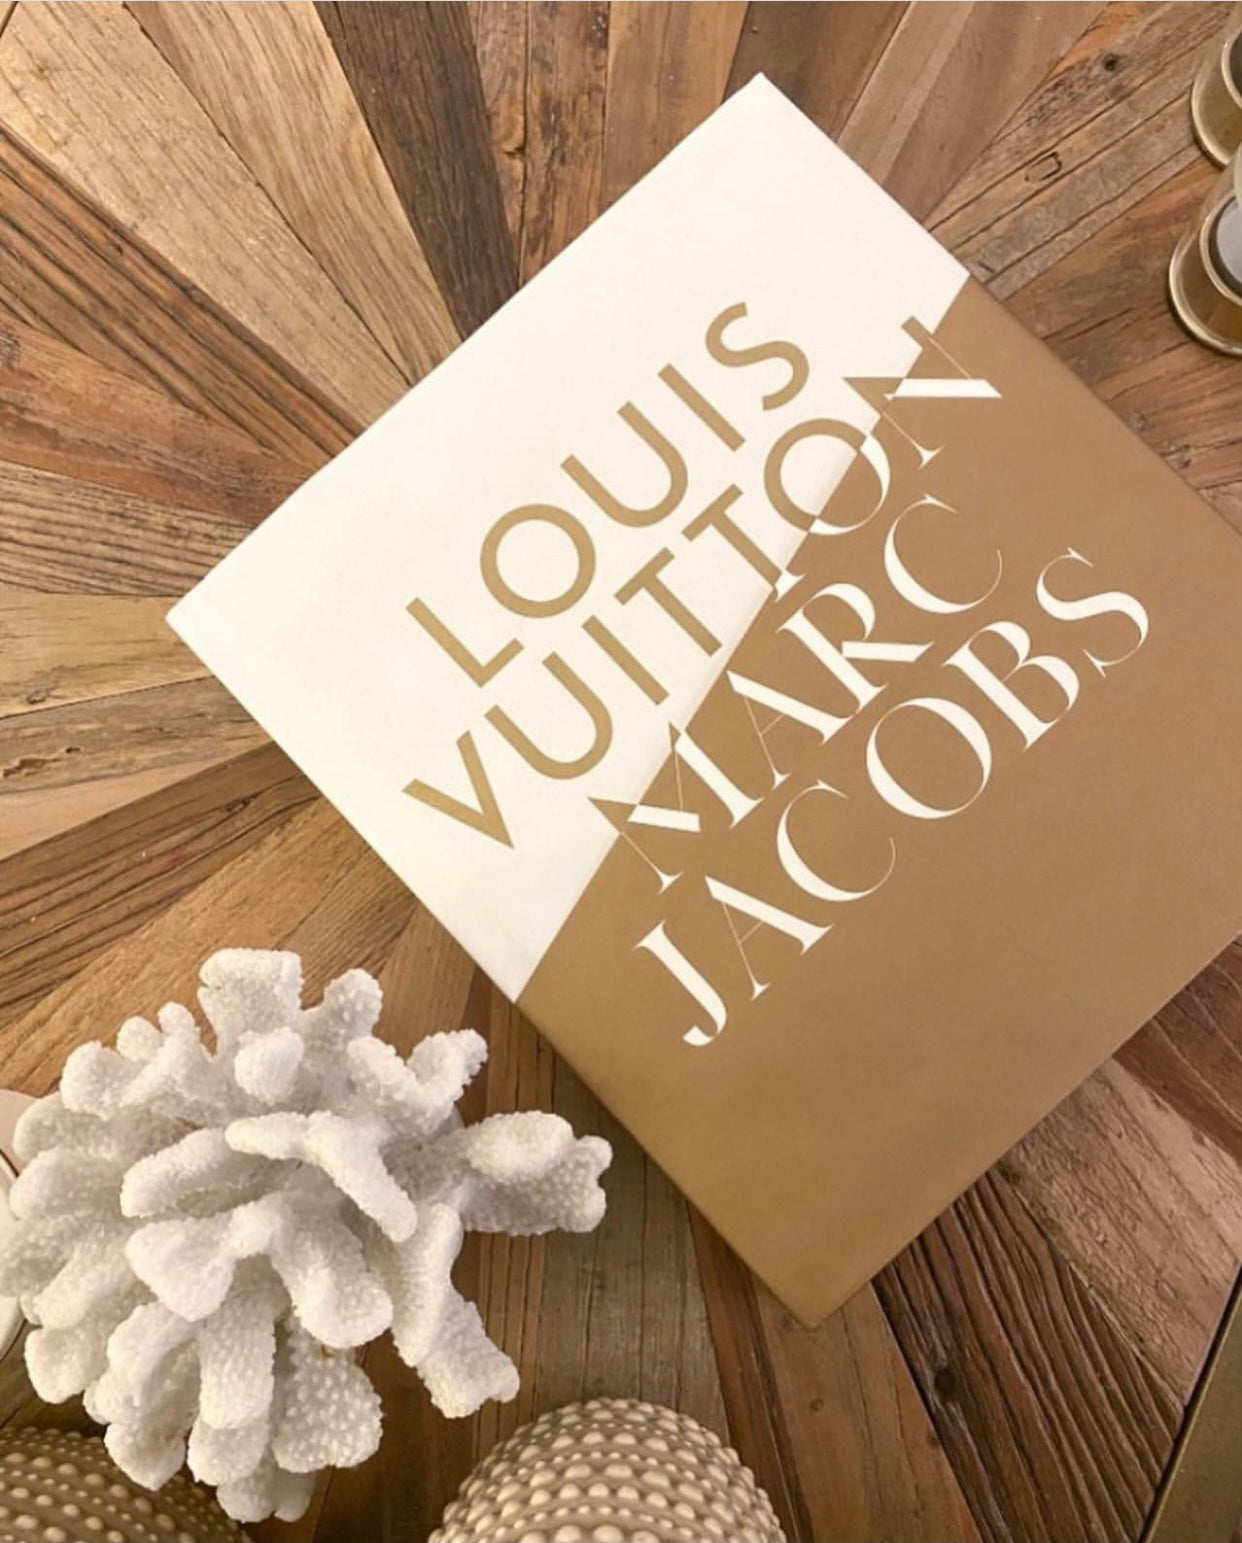 Rizzoli Books - Marc Jacobs And Louis Vuitton Book